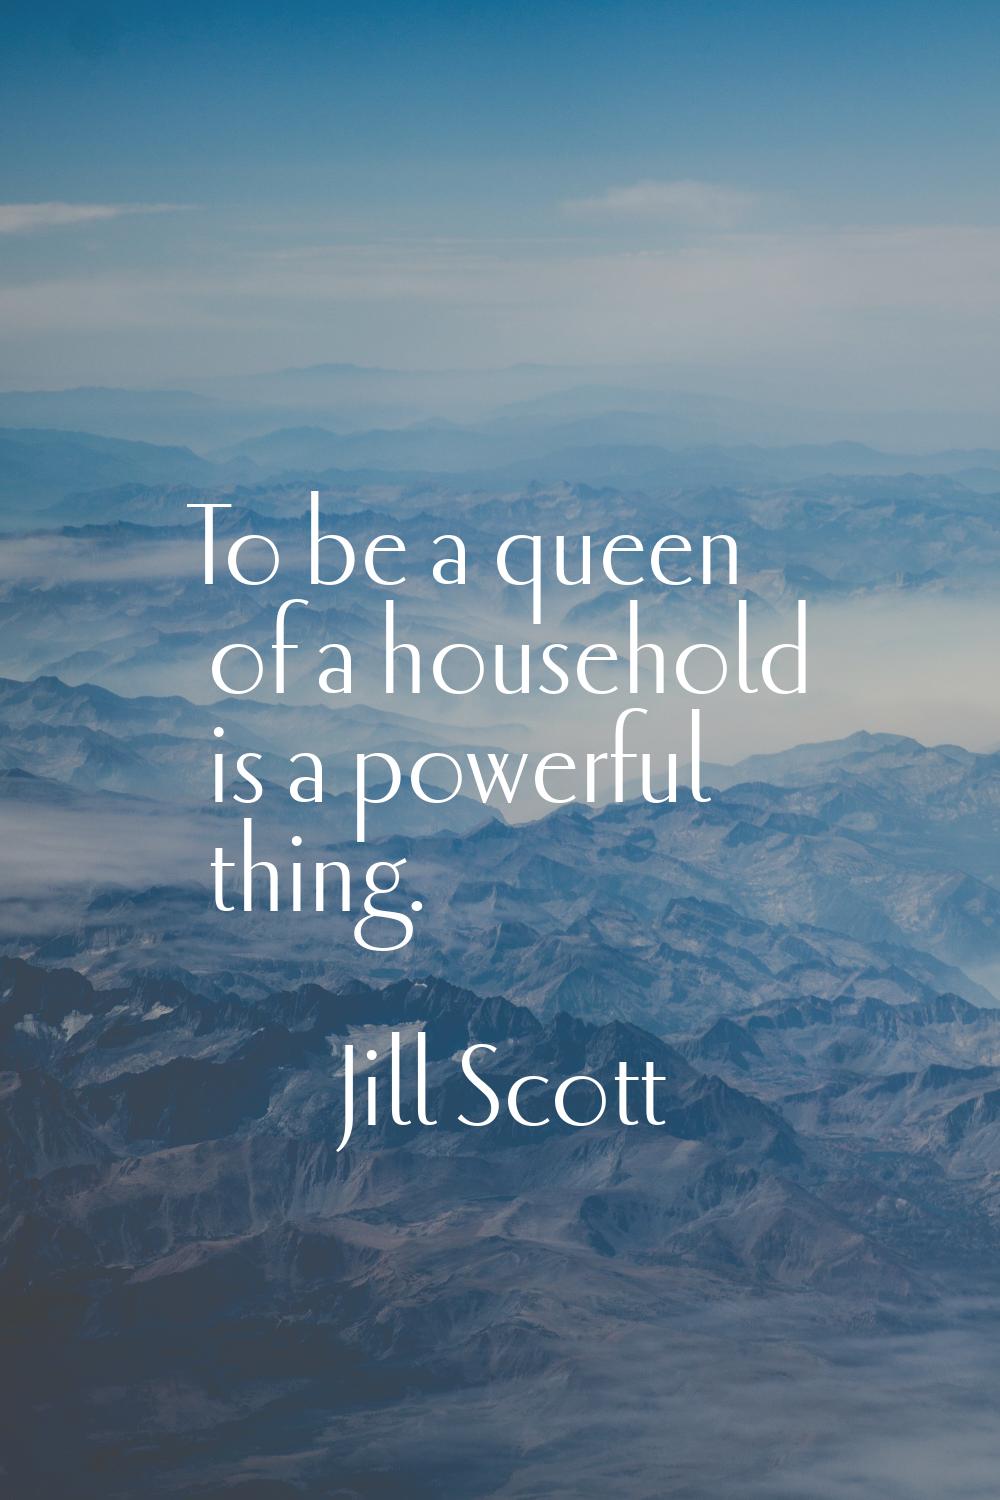 To be a queen of a household is a powerful thing.